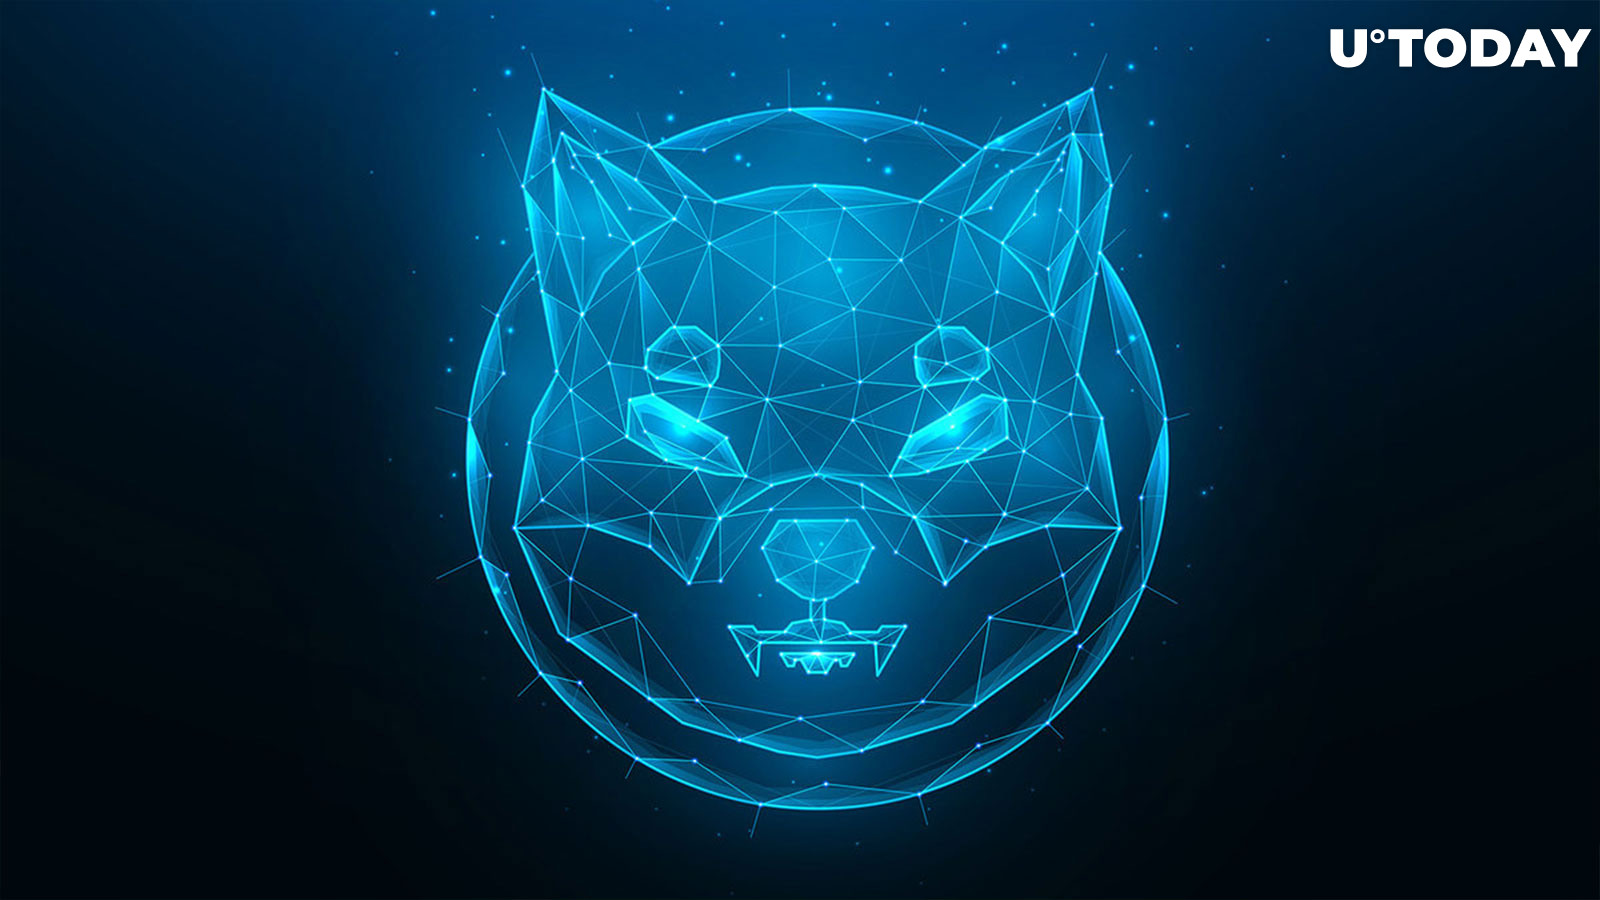 "Something Big Is Coming": Shiba Inu Community Reacts to Mysterious Message Posted by Developer